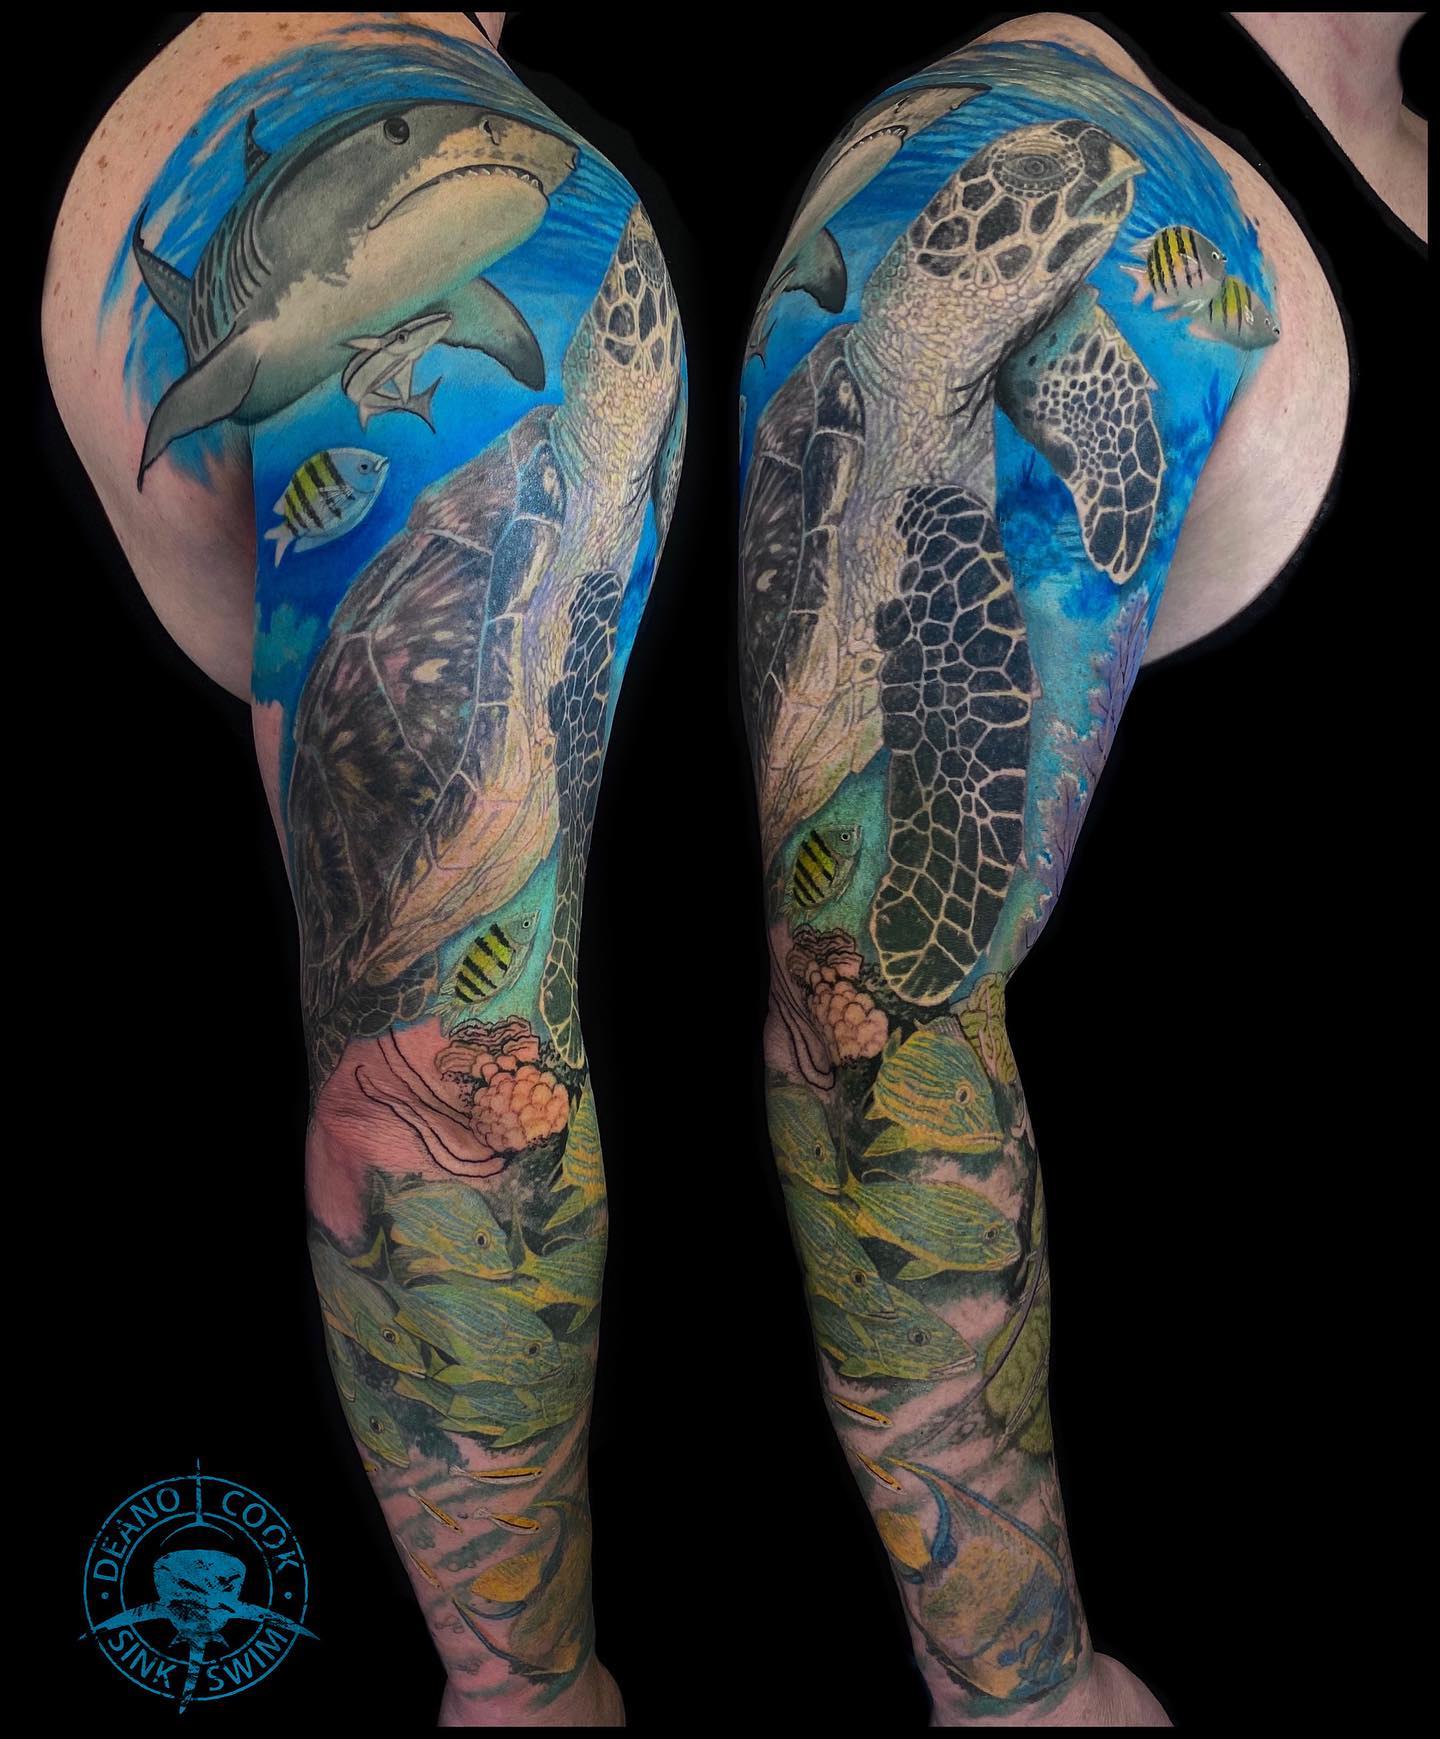 If you love sea turtles, then why not have them on your skin? But if you're looking for a way to cover up the tattoo, I think this is a great idea. Just make sure that the fish and shark aren't too big. You don't want them to take over!